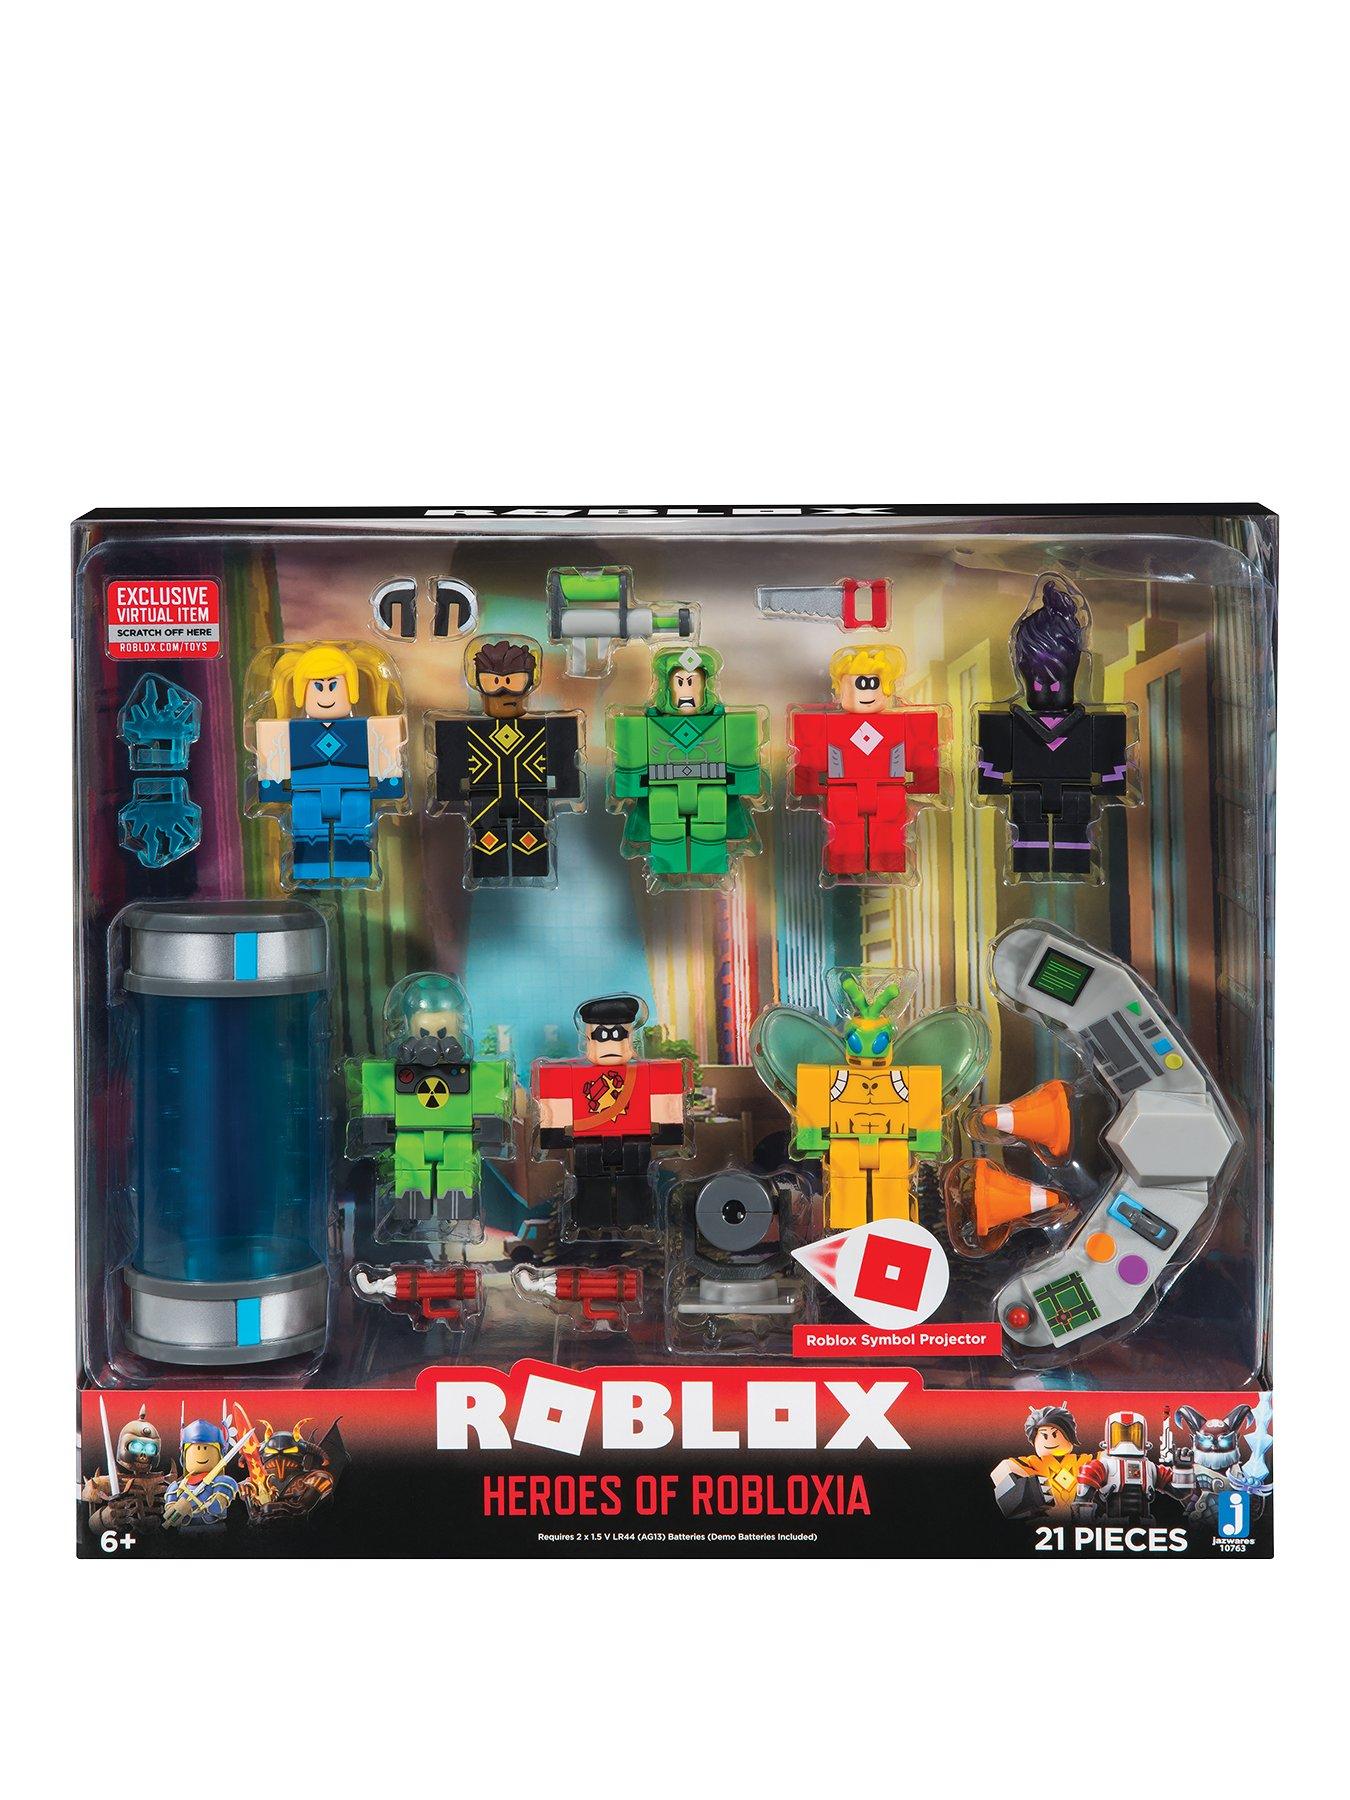 Roblox Heroes Of Robloxia Playset Very Co Uk - roblox heroes of robloxia playset collectible kids new gift